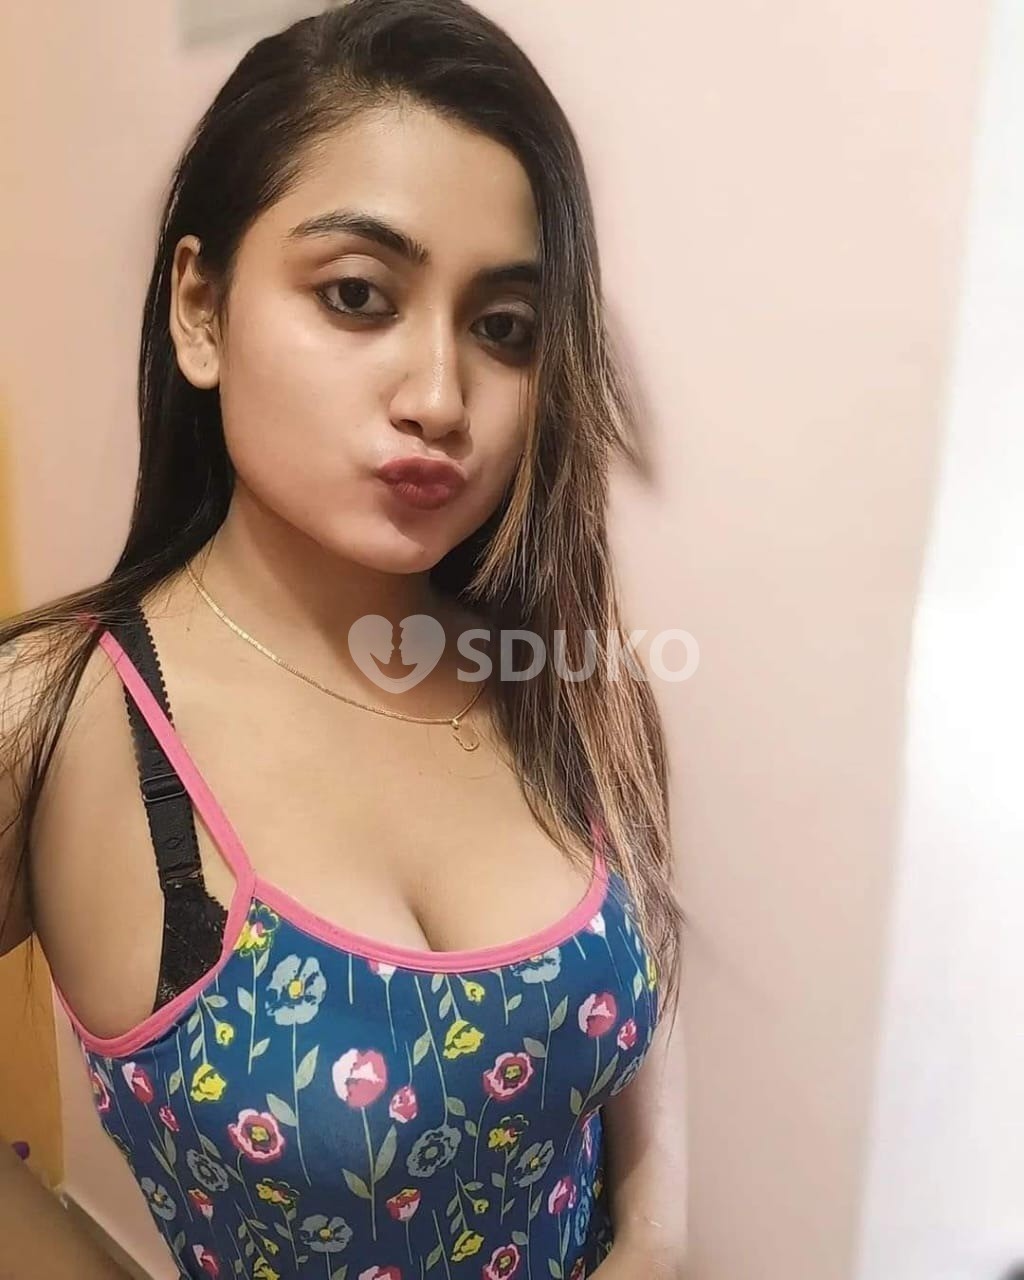 Ahmedabad Low price high profile 💫🌟college girl and aunty available any time available service genuine vip call gi